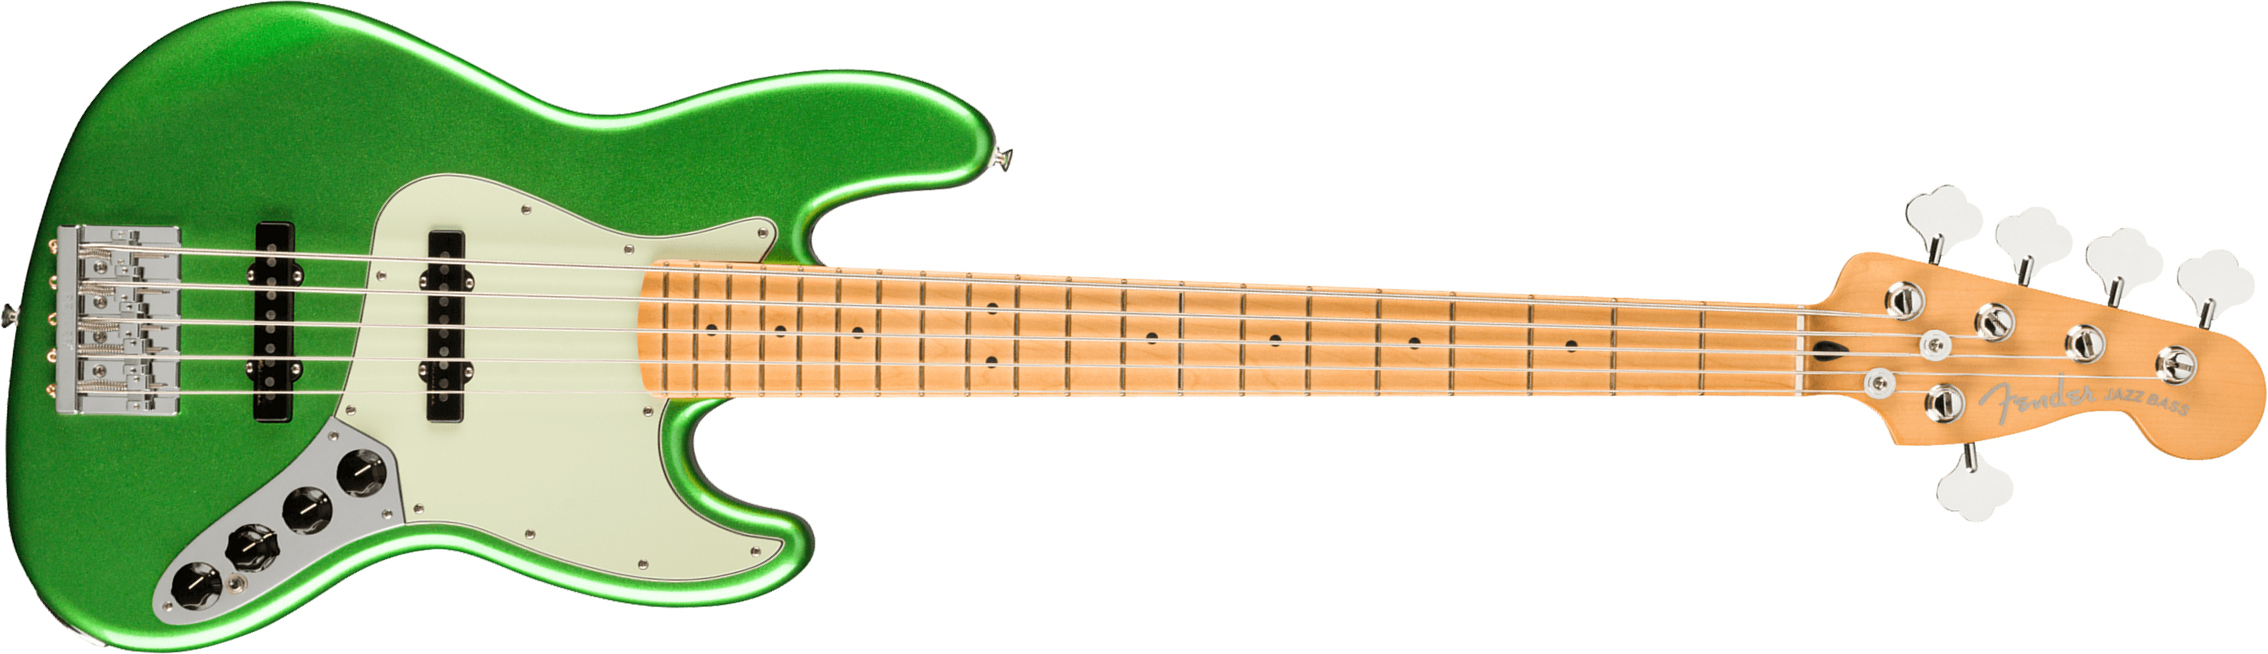 Fender Jazz Bass Player Plus V Mex 5c Active Mn - Cosmic Jade - Solid body electric bass - Main picture